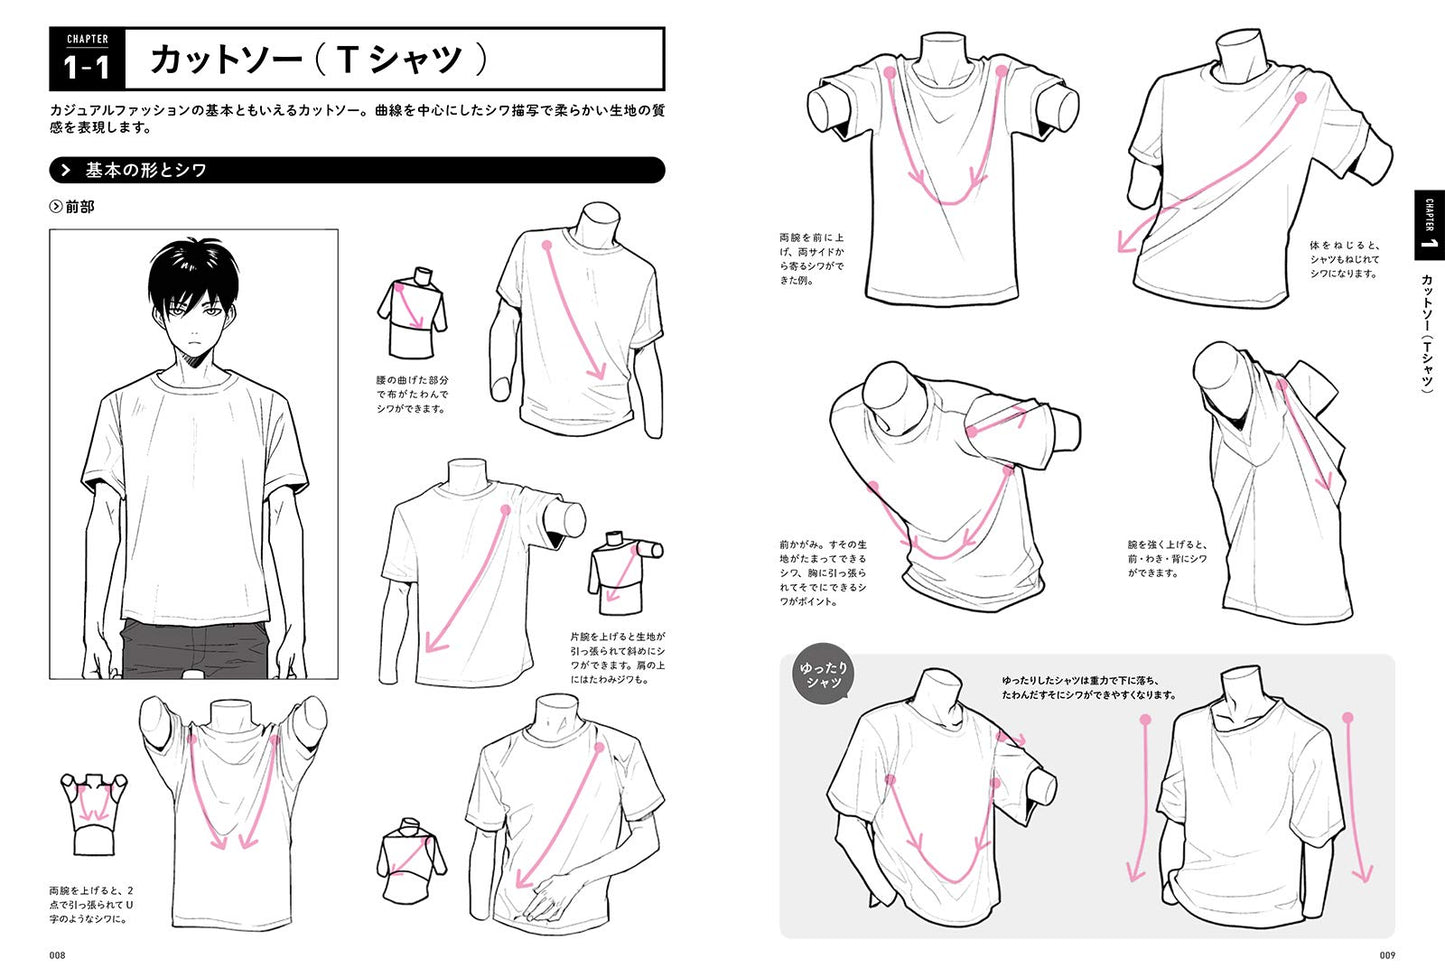 How To Draw Clothes with Movement and Wrinkles